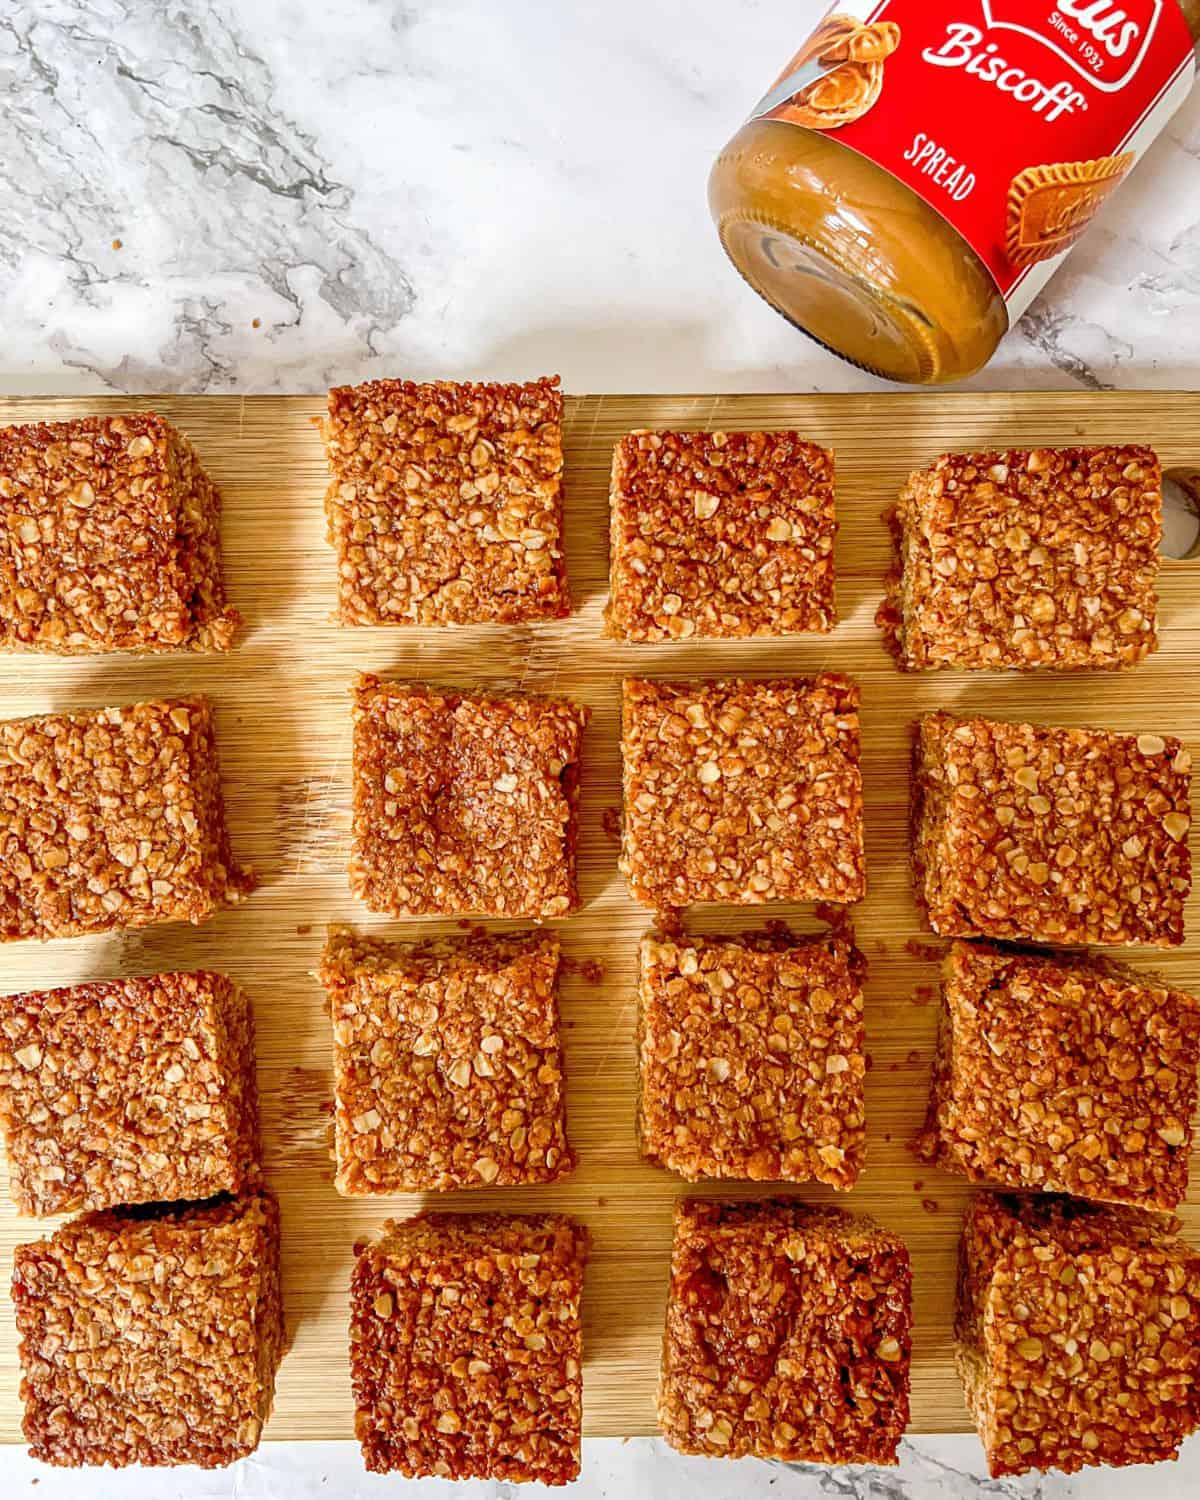 Flapjack squares laid out on a wooden chopping board with a jar of biscoff in the background.